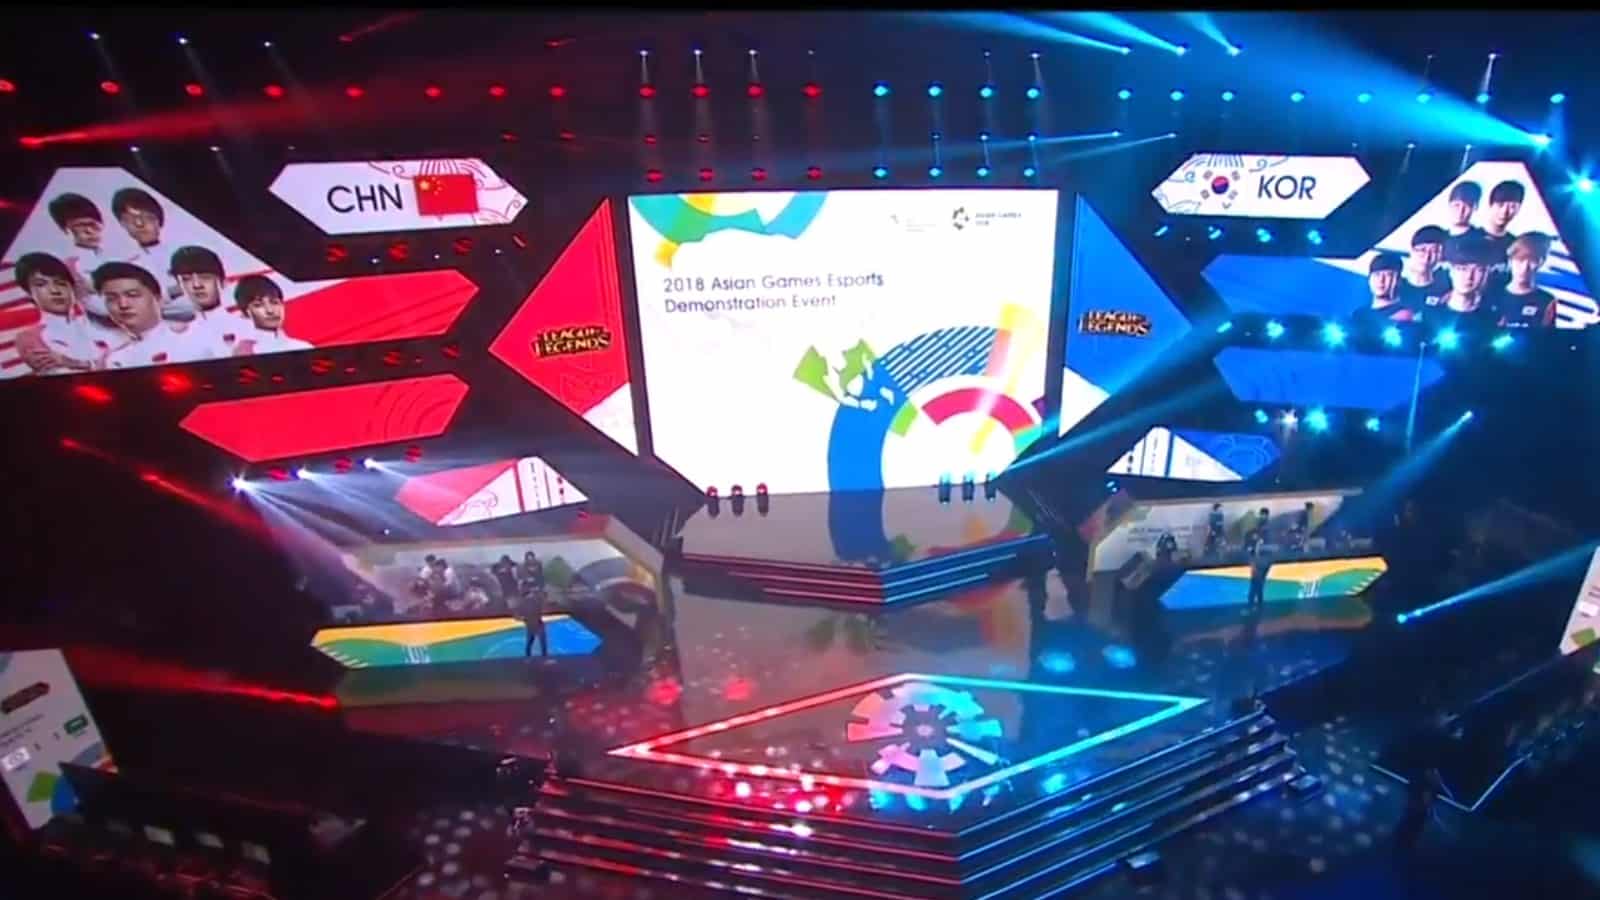 China face Korea in the 2018 Asian Games League of Legends demonstration event final